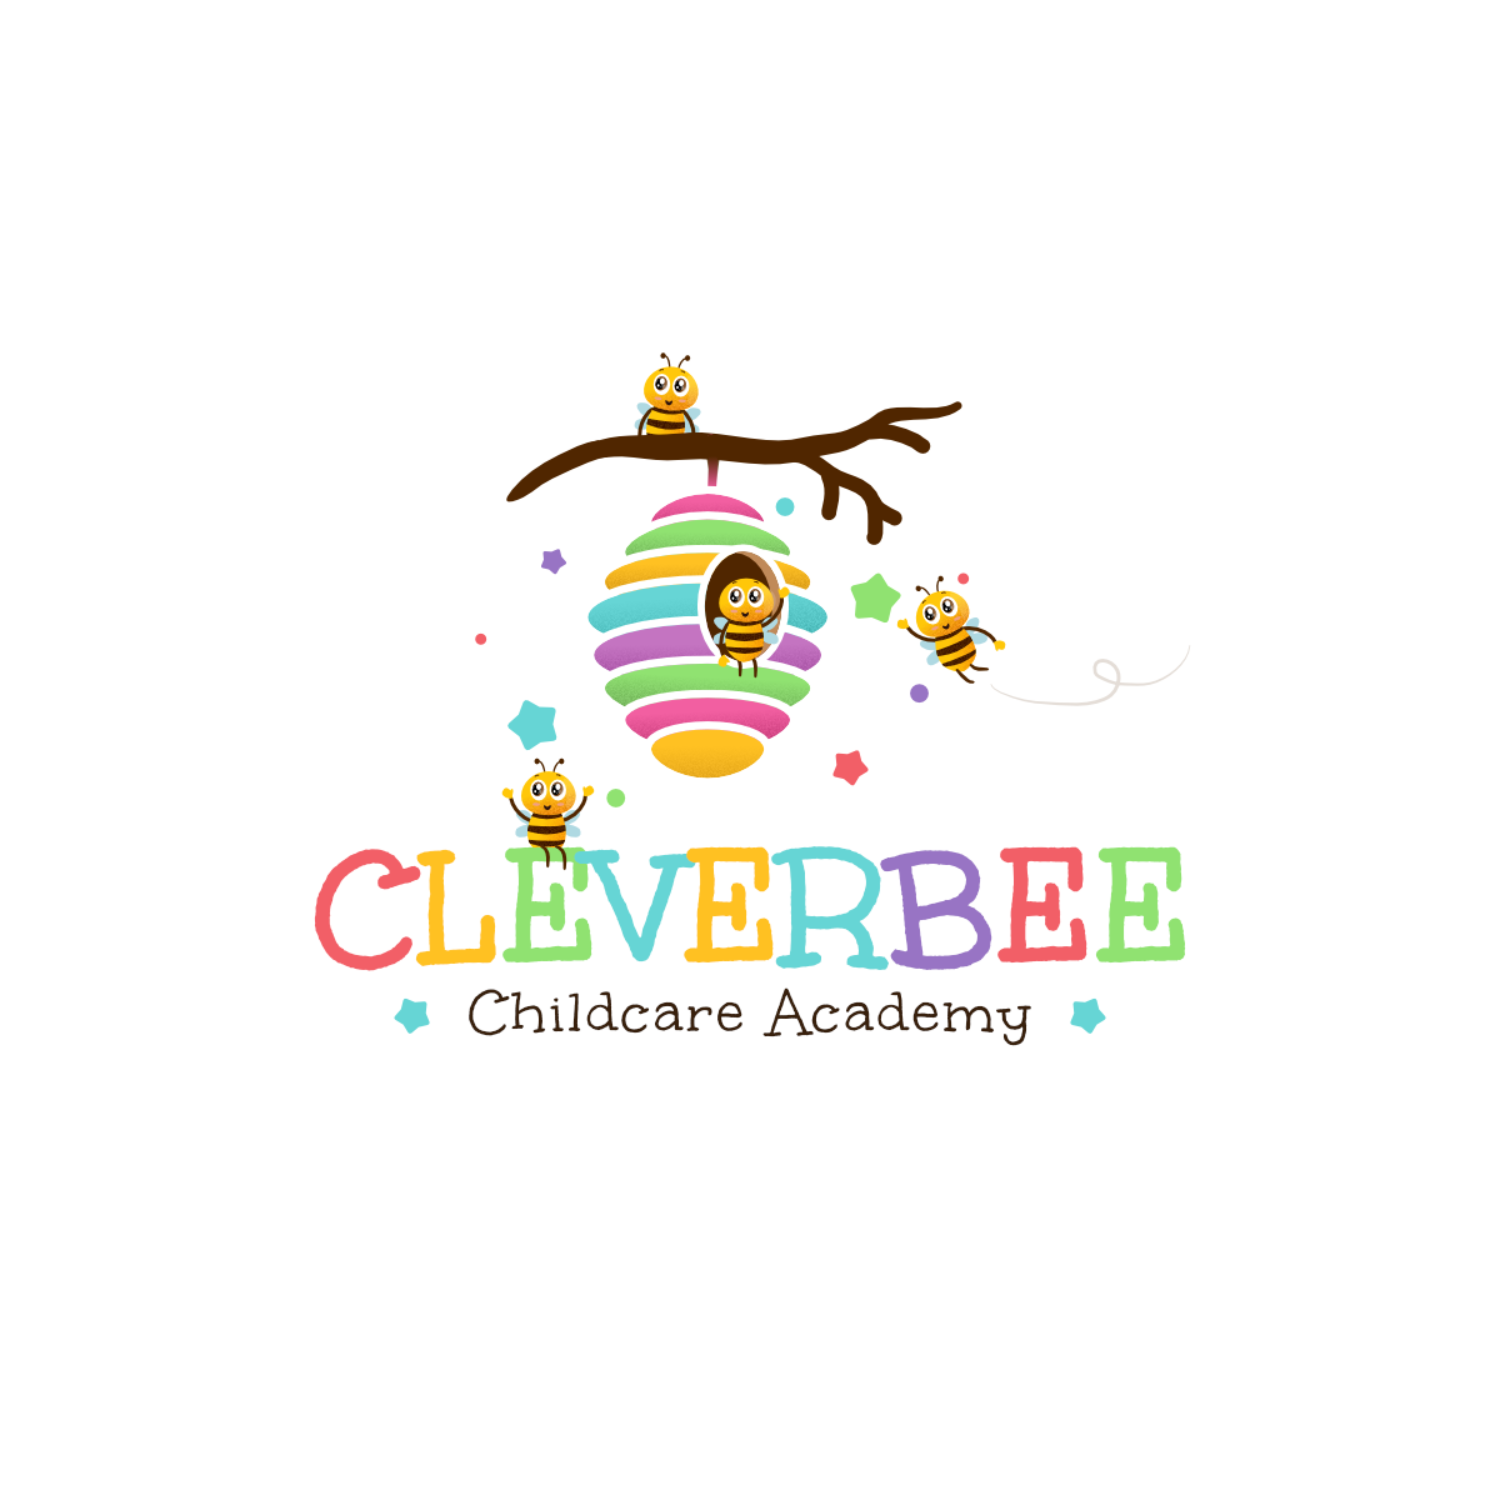 lil' honeybees happily flying around their honeycomb. This is a logo design for a childcare academy.